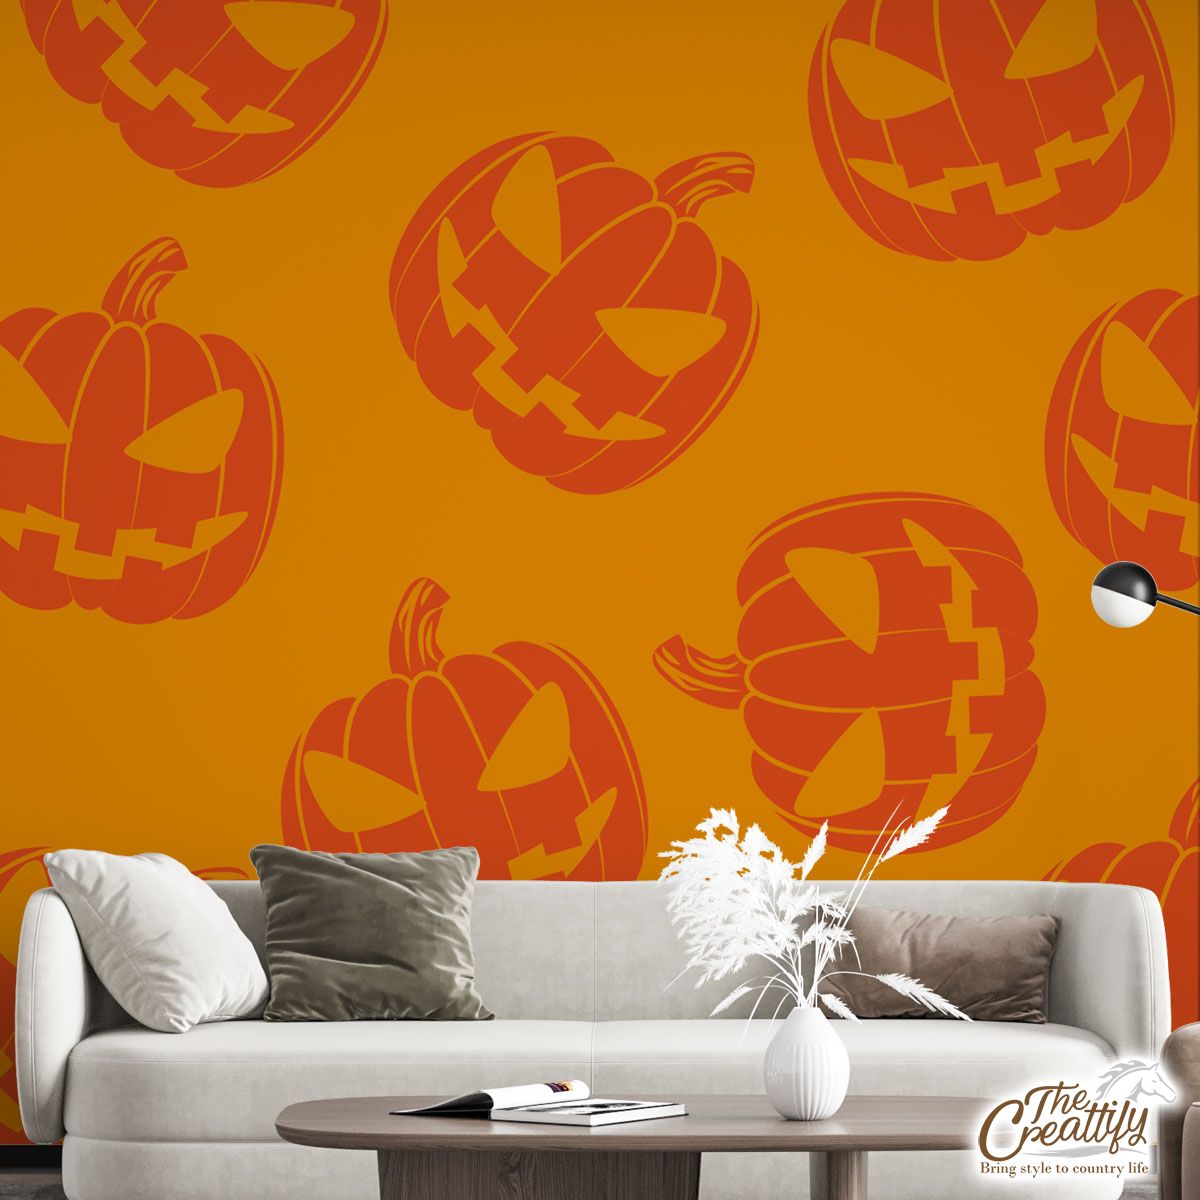 Scary Pumpkin Face On The Orange Color Background Halloween Wall Mural